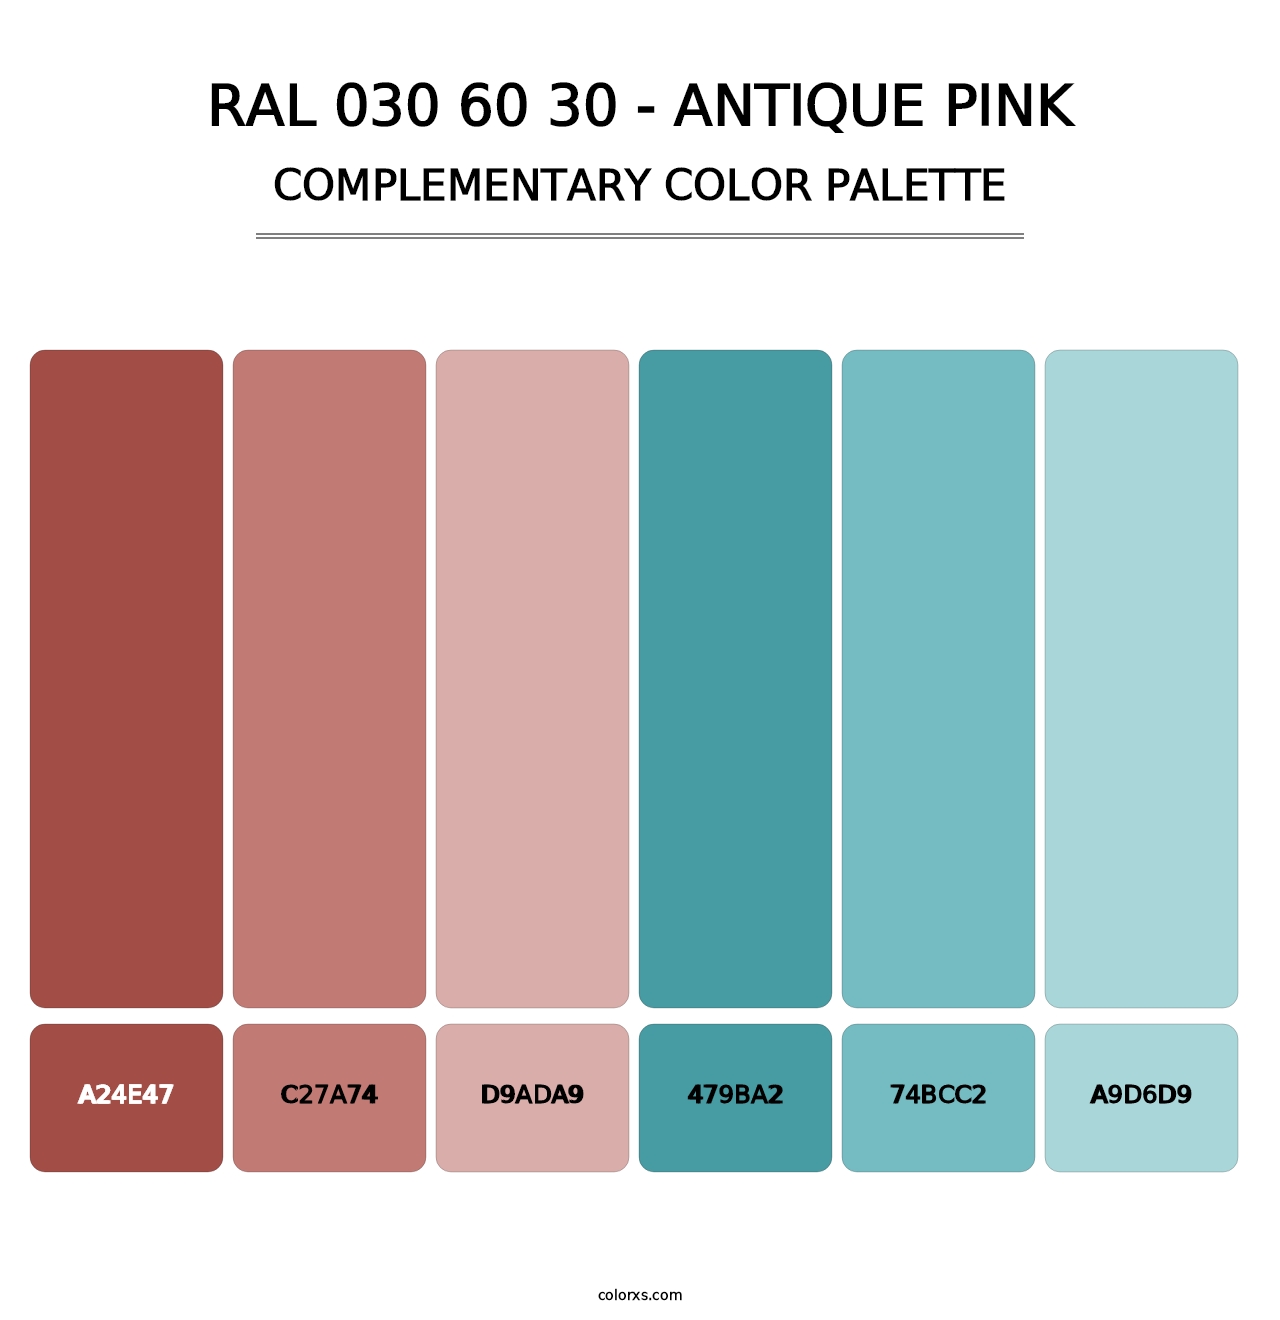 RAL 030 60 30 - Antique Pink - Complementary Color Palette